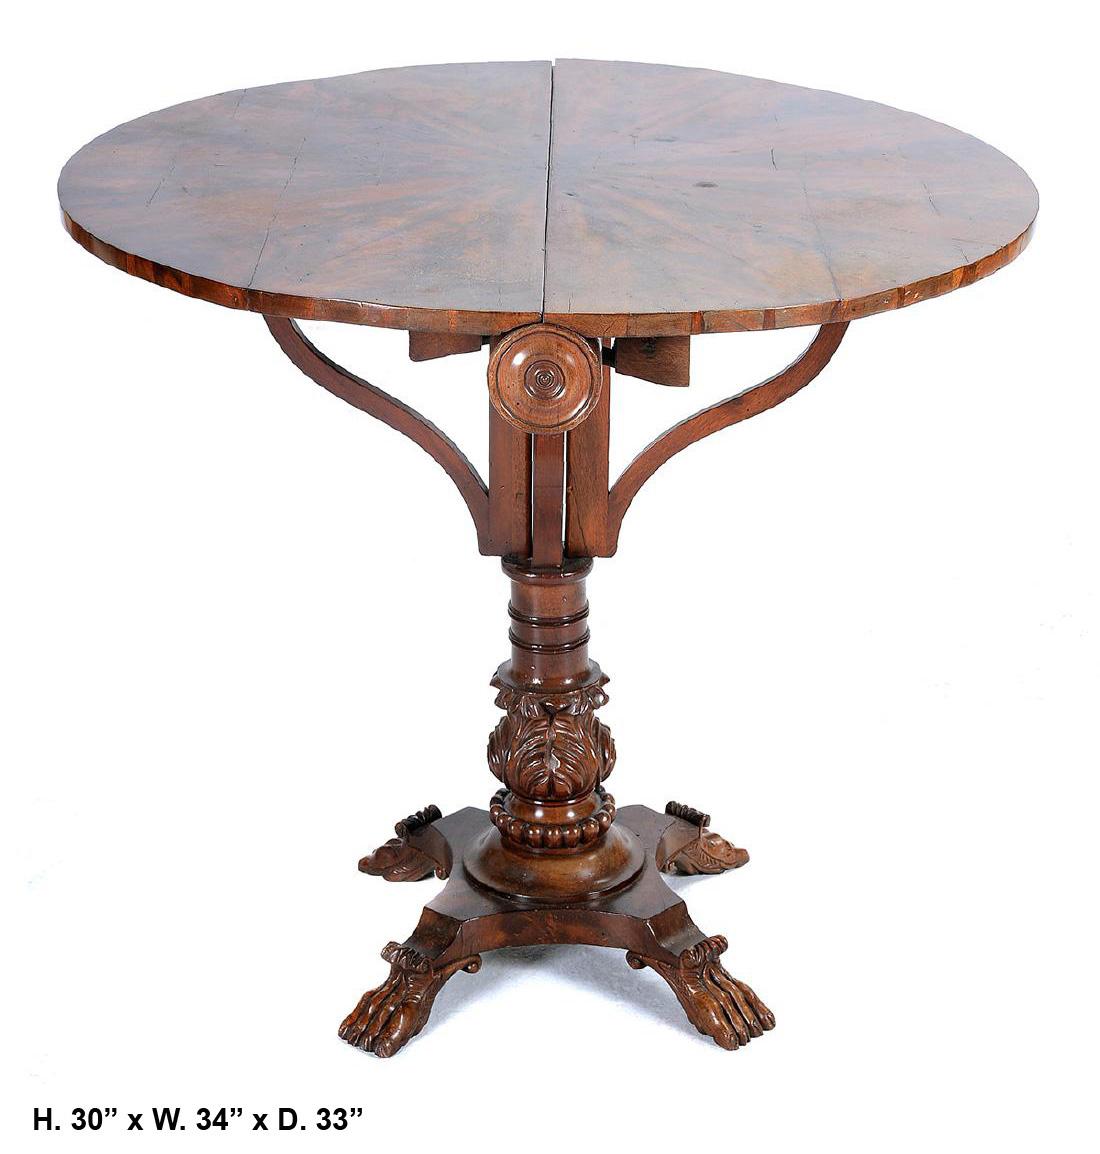 Beautiful unique 19th century American mahogany butterfly pedestal table.
The mahogany veneered round top cut to fold as a butterfly resting on pedestal over stretcher with four animal feet.
Measures: H 30